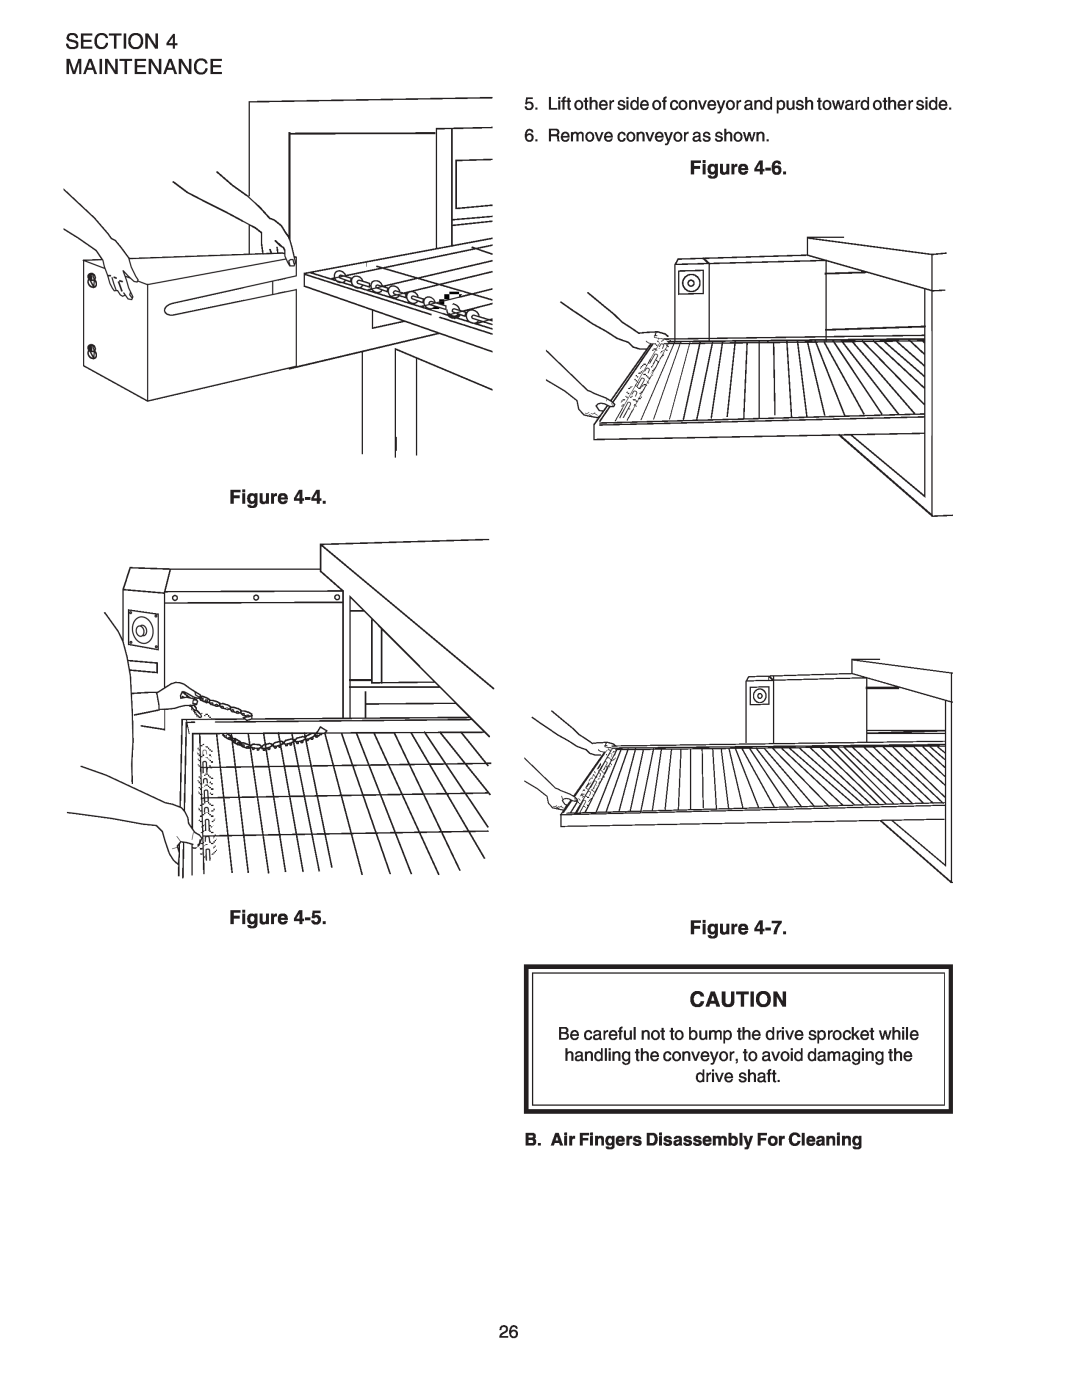 Middleby Marshall PS520 installation manual Section Maintenance, Figure Figure, B. Air Fingers Disassembly For Cleaning 